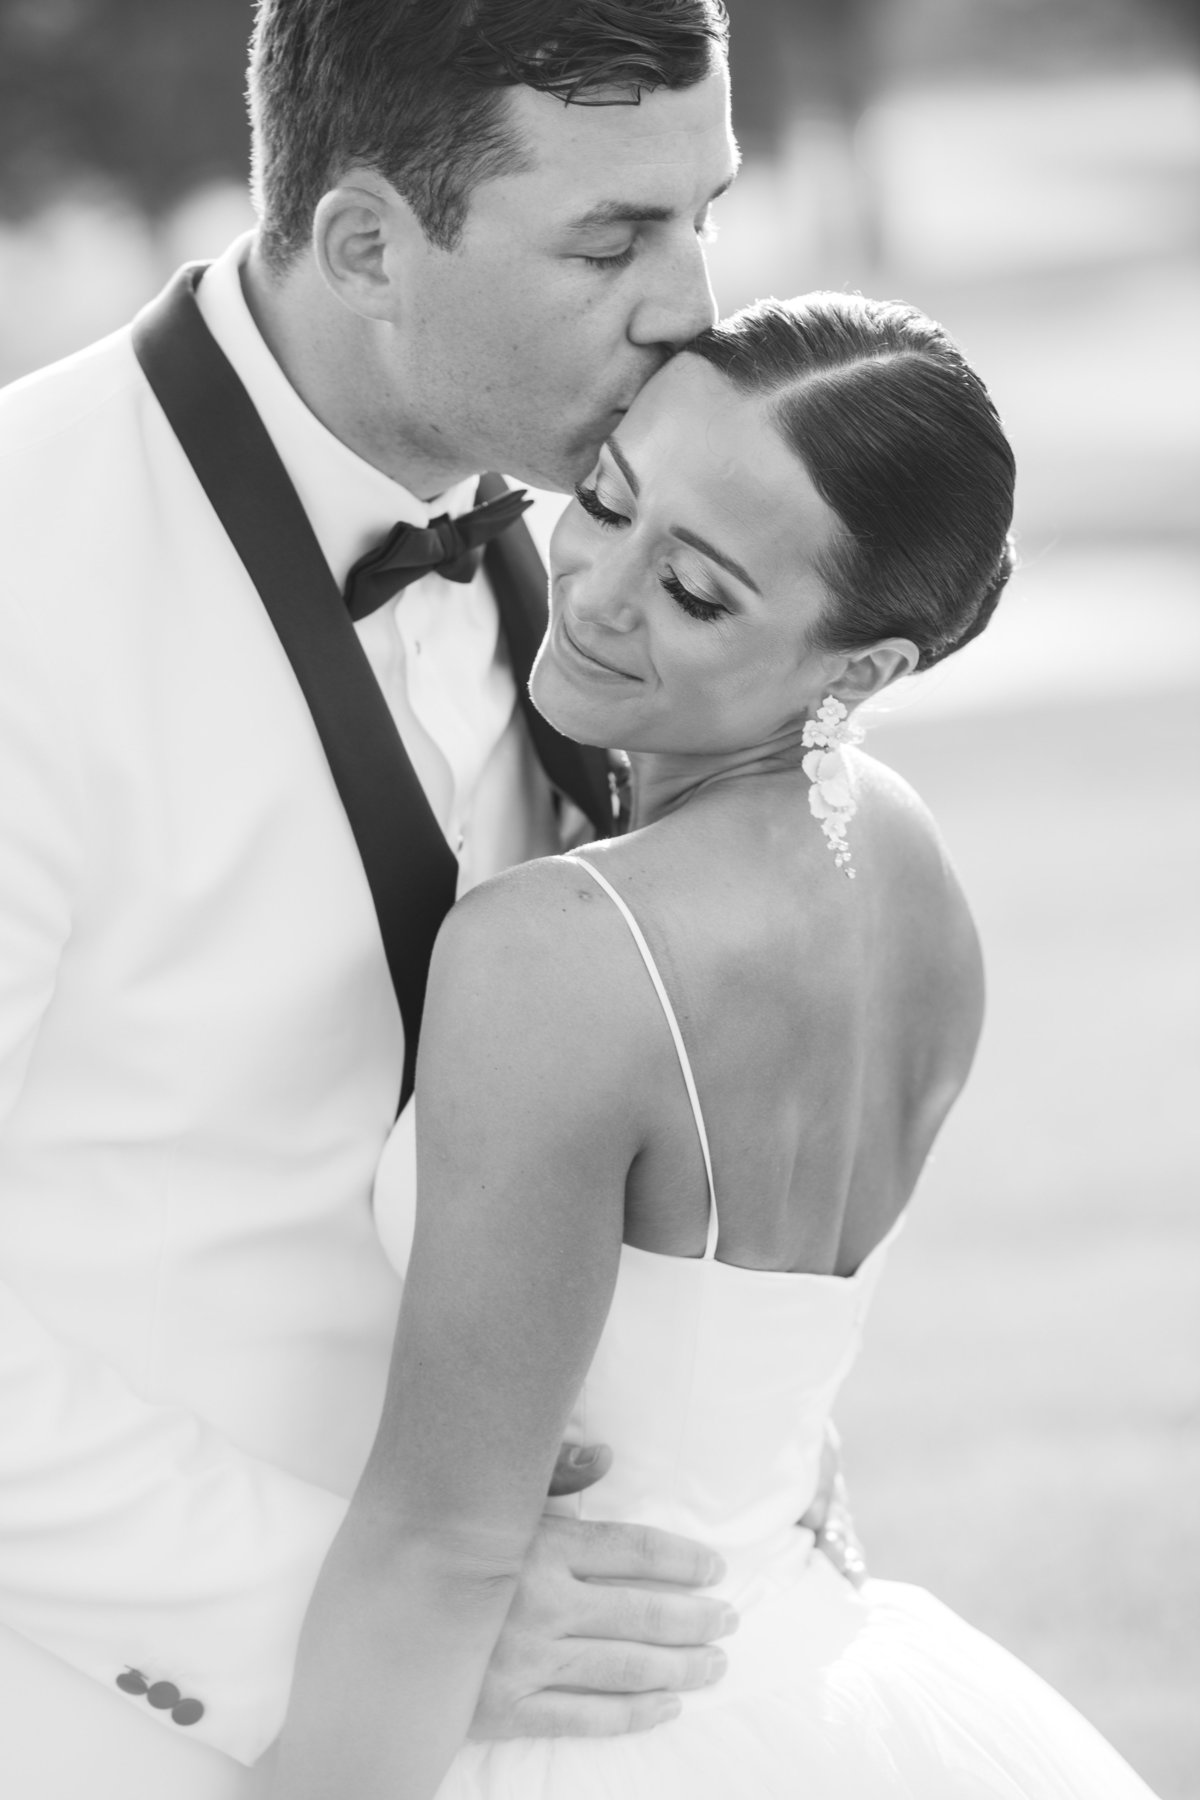 groom kissing bride on forehead in black and white photo from wedding at The Muttontown Club